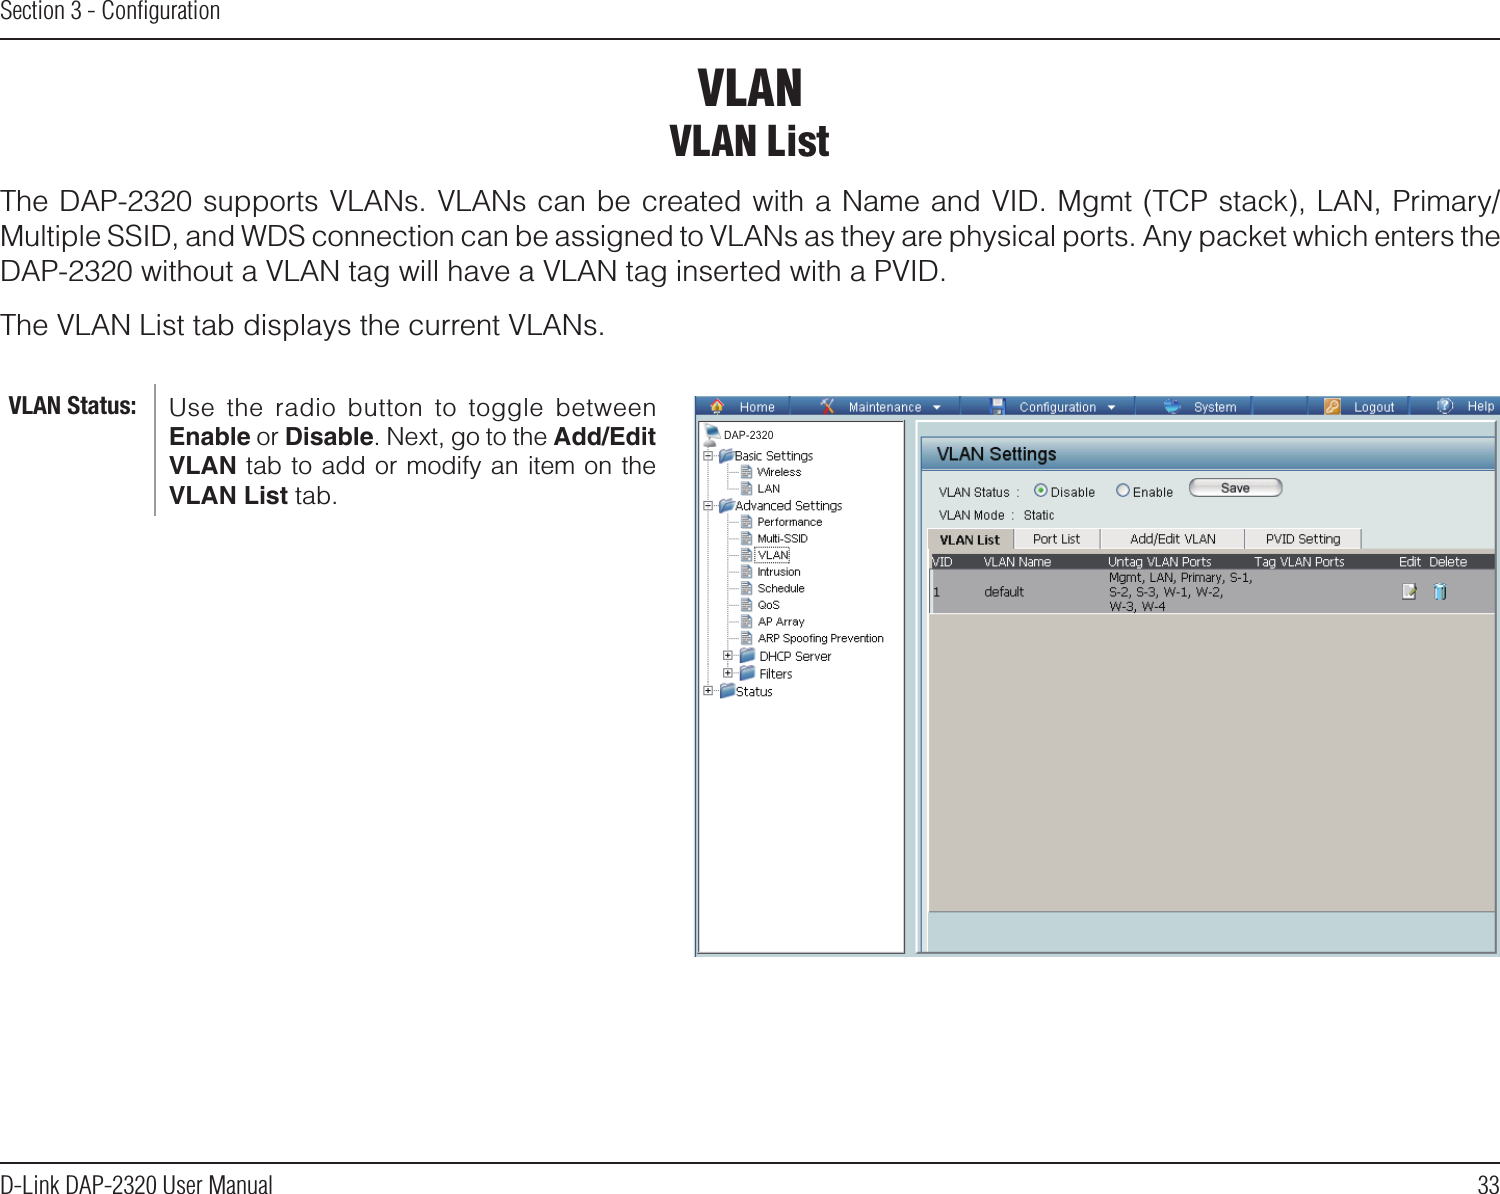 33D-Link DAP-2320 User ManualSection 3 - ConﬁgurationVLANVLAN ListThe DAP-2320 supports VLANs. VLANs can be created with a Name and VID. Mgmt (TCP stack), LAN, Primary/Multiple SSID, and WDS connection can be assigned to VLANs as they are physical ports. Any packet which enters the DAP-2320 without a VLAN tag will have a VLAN tag inserted with a PVID.The VLAN List tab displays the current VLANs.Use  the  radio  button  to  toggle  between Enable or Disable. Next, go to the Add/Edit VLAN tab to add or modify an item on the VLAN List tab. VLAN Status:DAP-2320